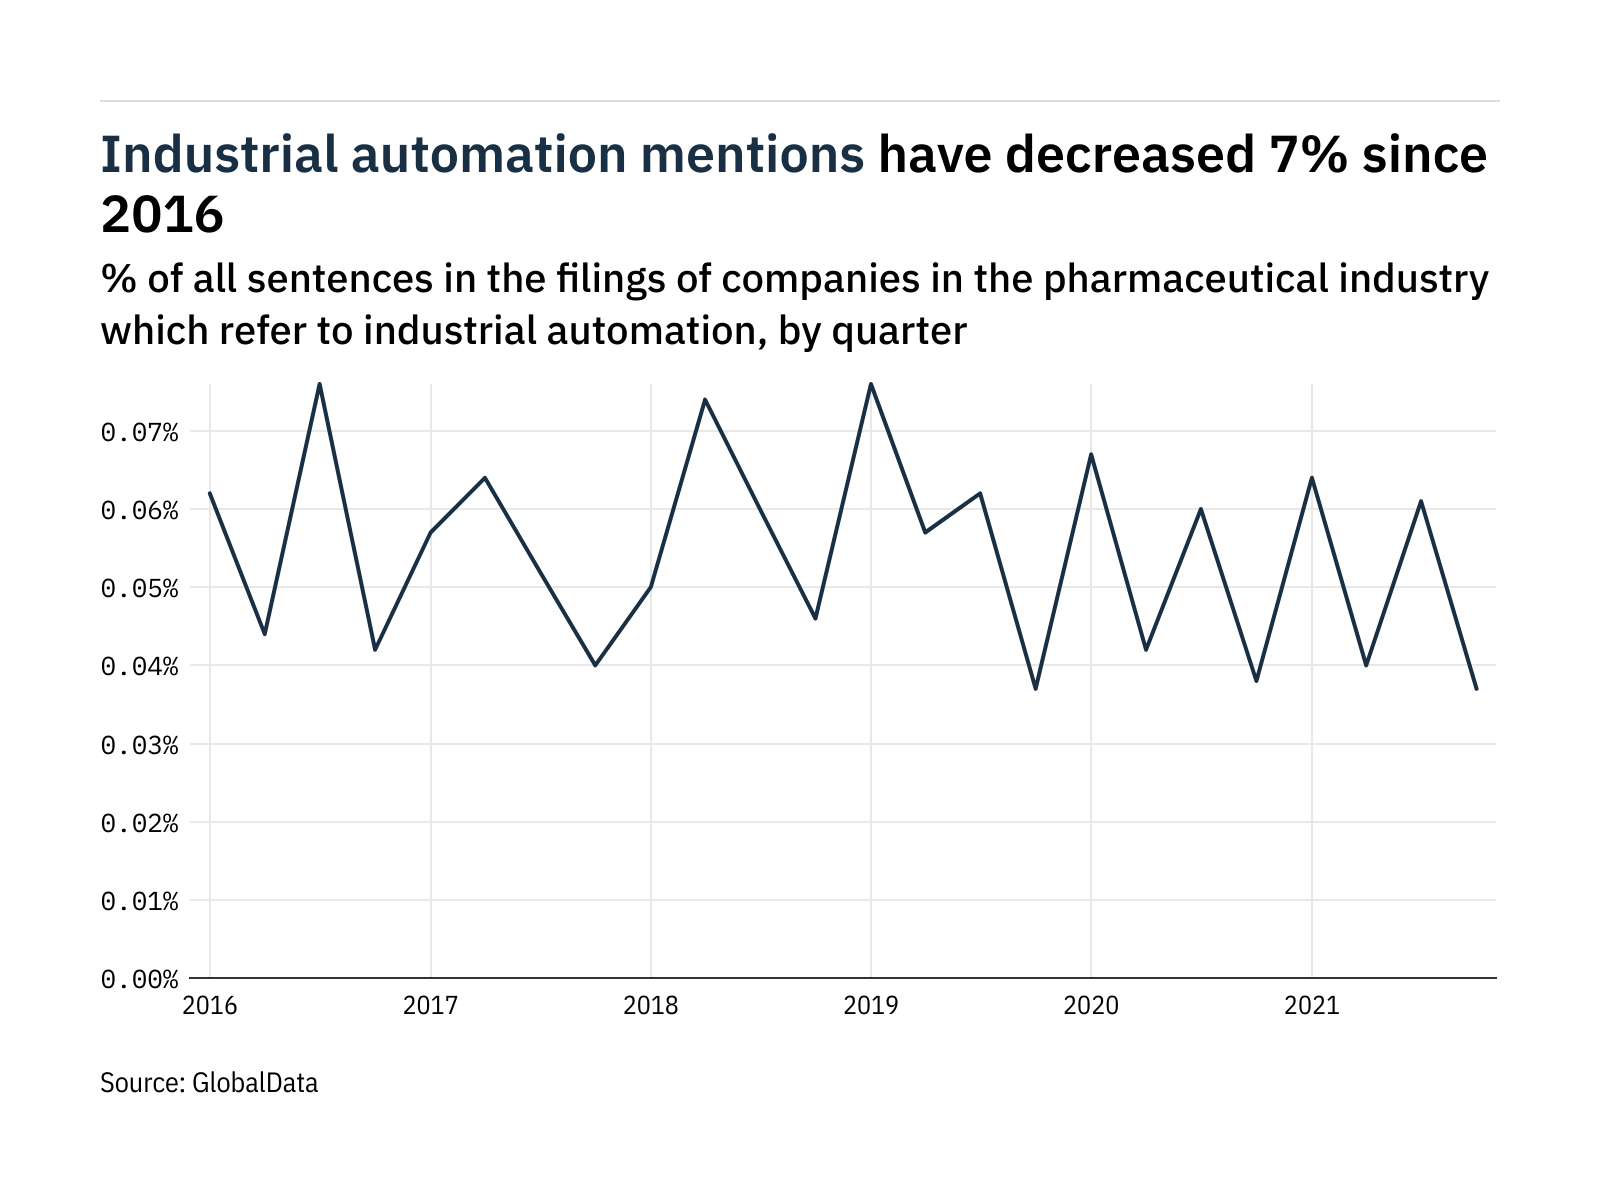 AstraZeneca mentions industrial automation the most in company filings in Q4 2021